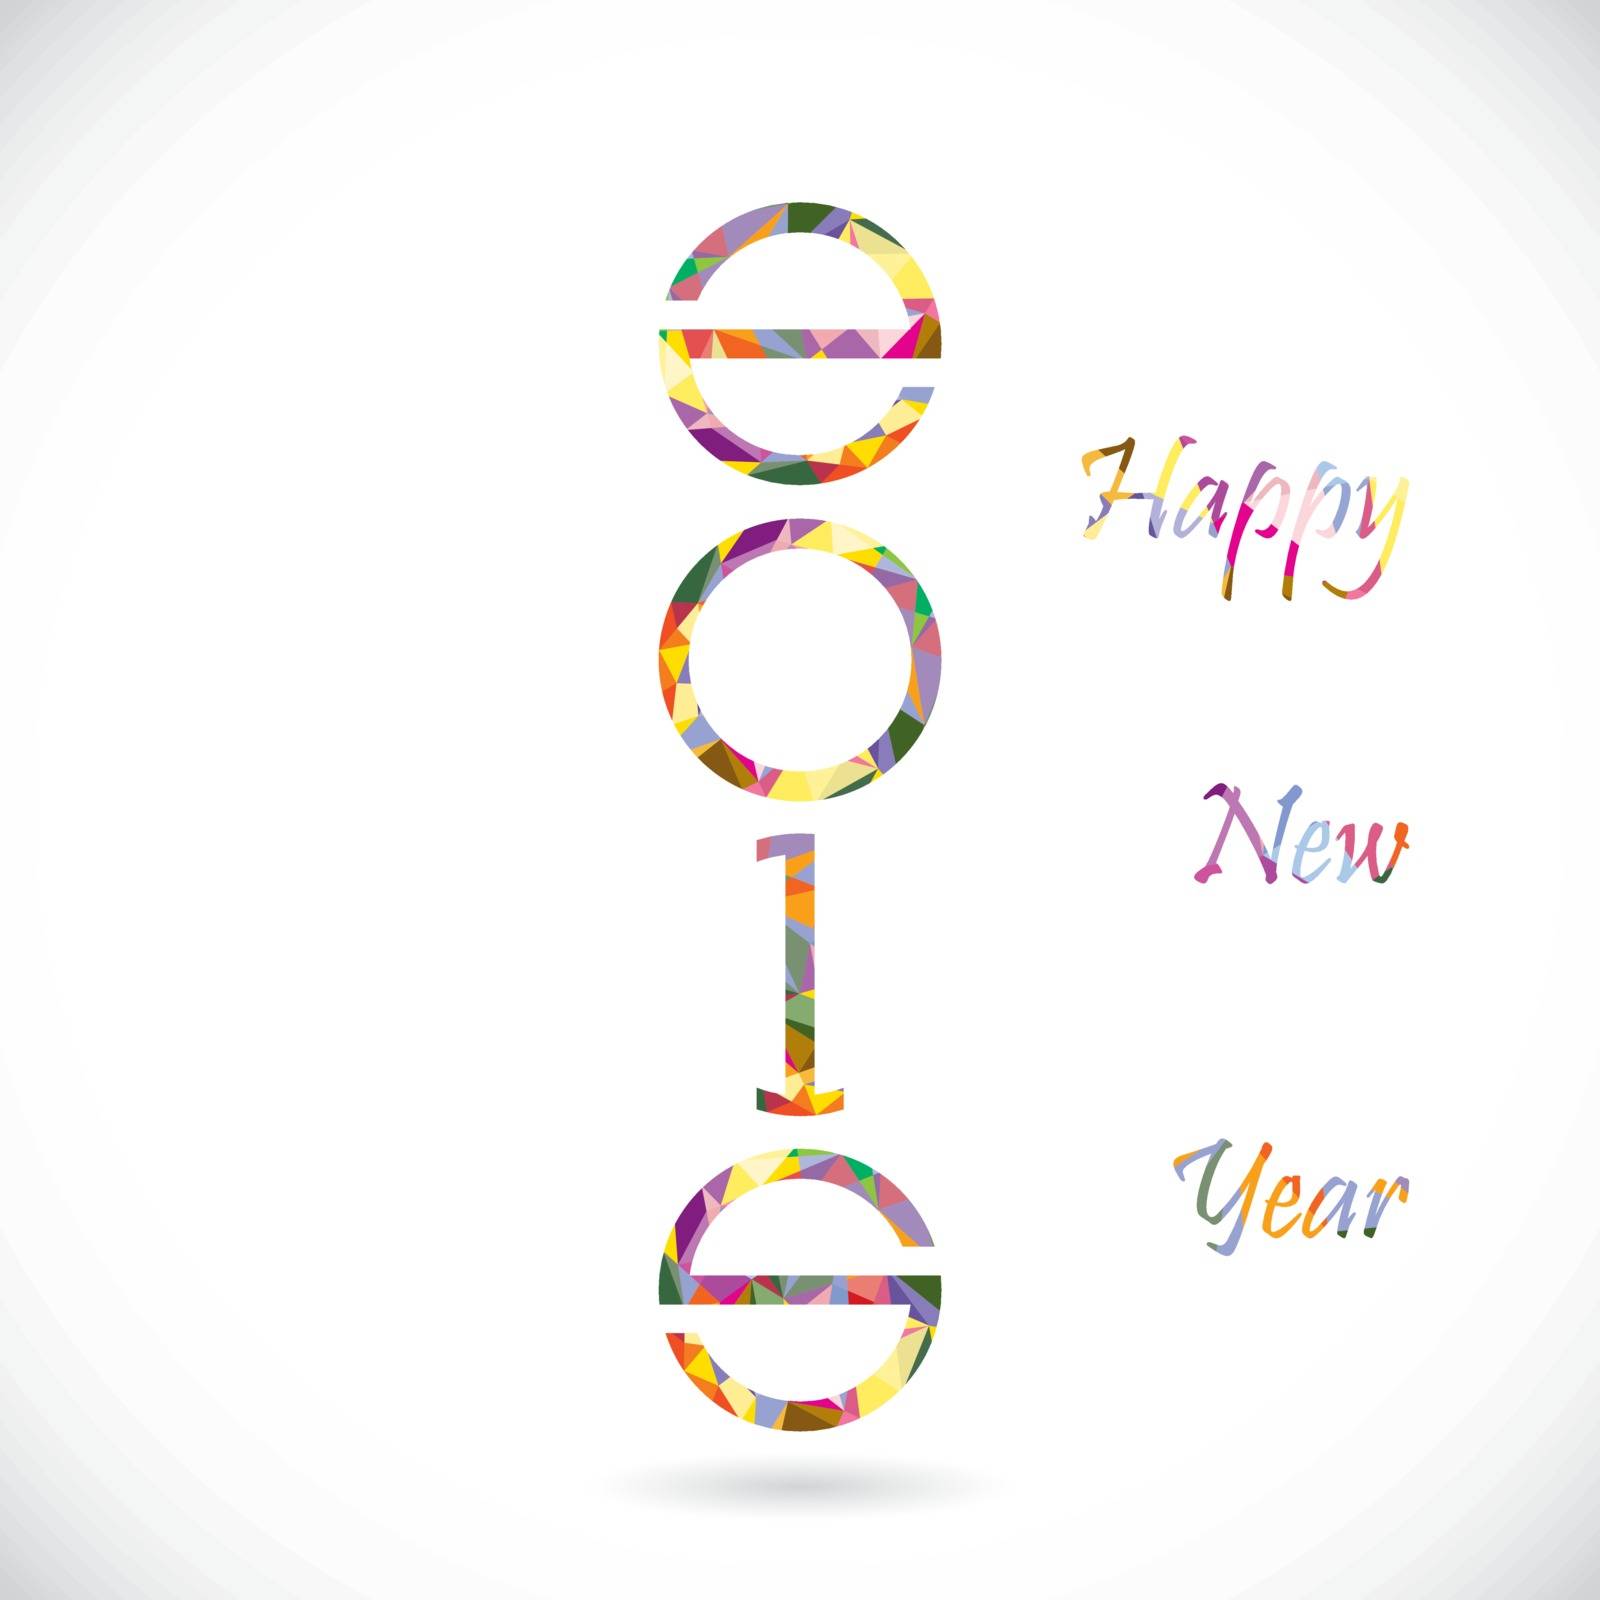 Happy new year 2015 creative greeting card design. by chatchai5172